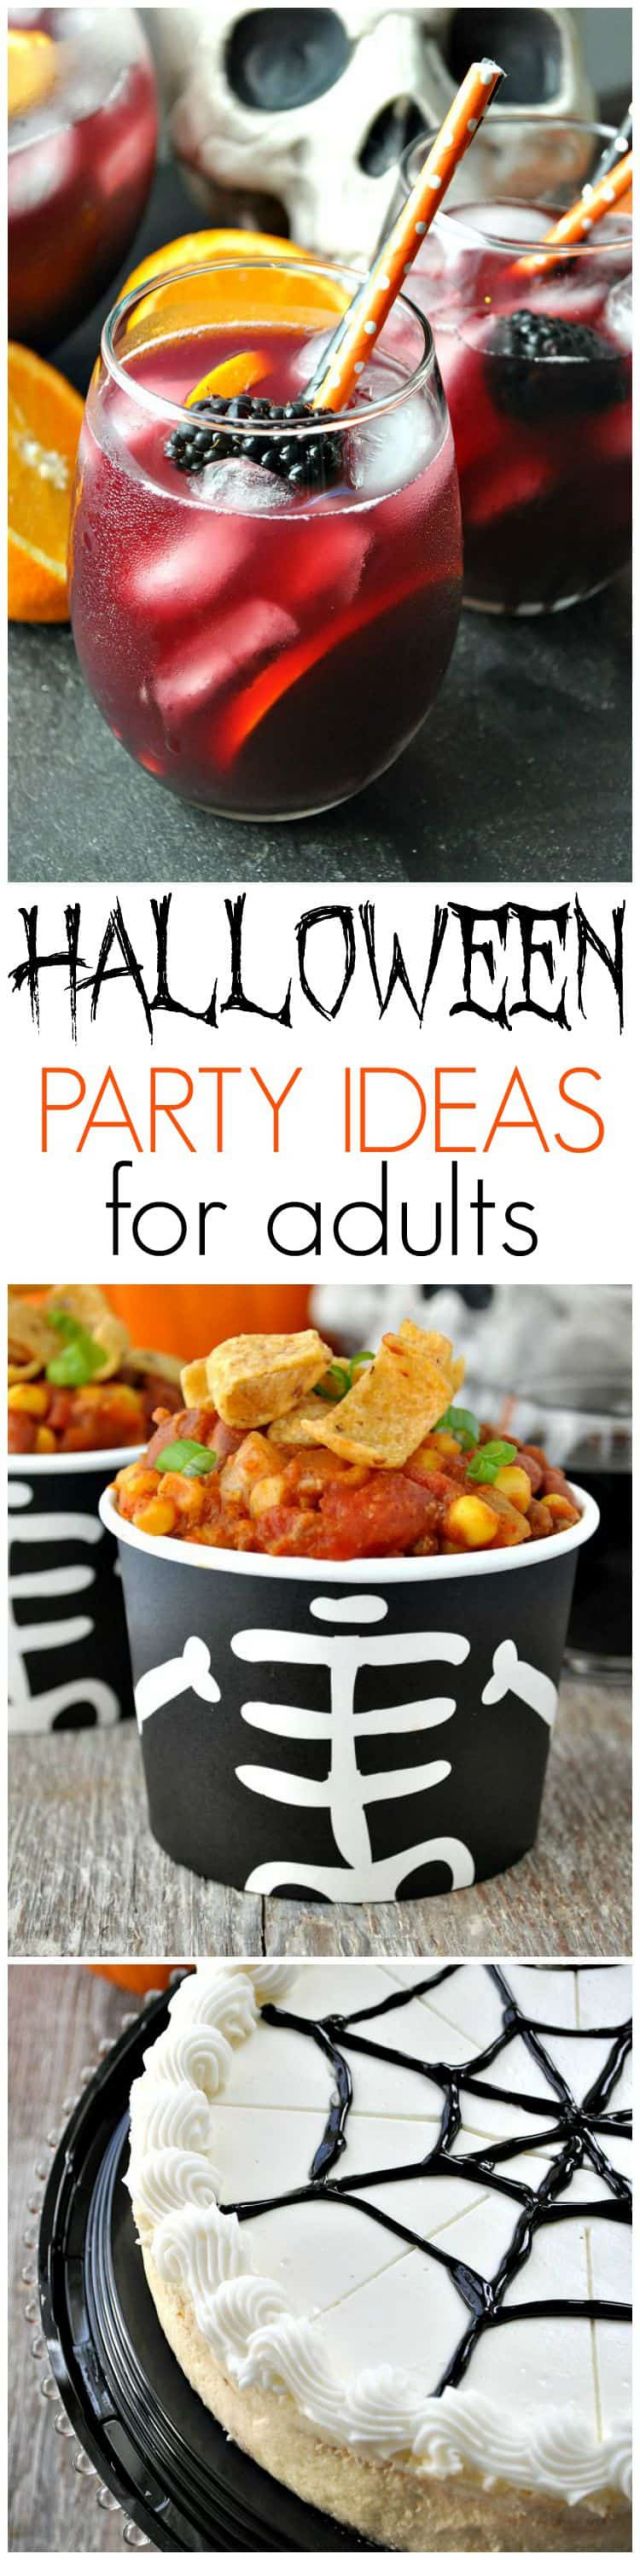 Halloween Costume Party Ideas For Adults
 Slow Cooker Pumpkin Chili Halloween Party Ideas for